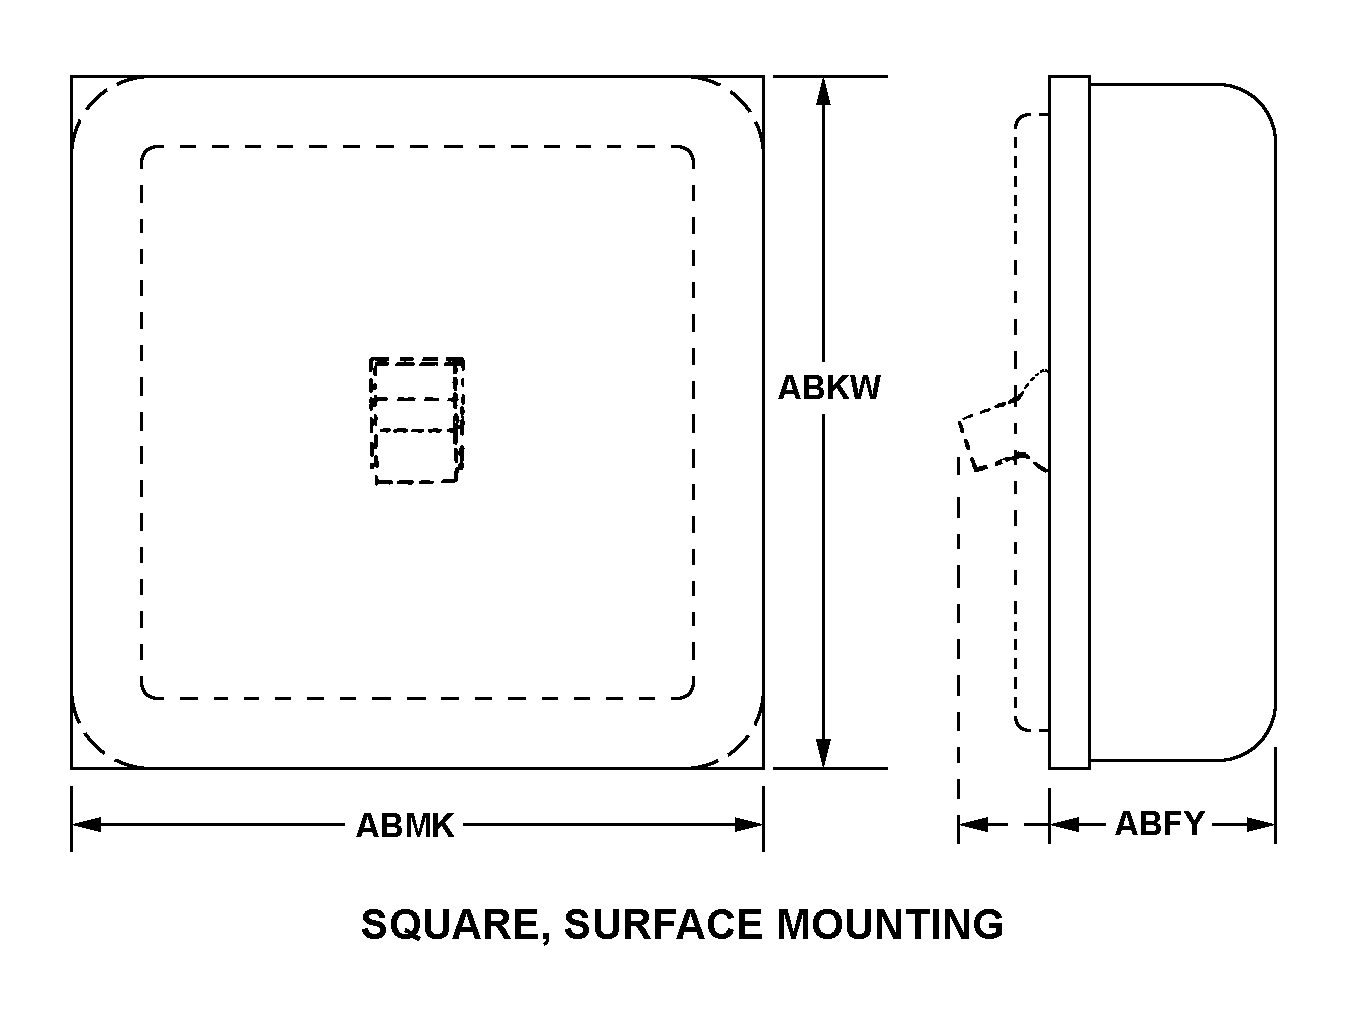 SQUARE, SURFACE MOUNTING style nsn 5895-01-025-8763